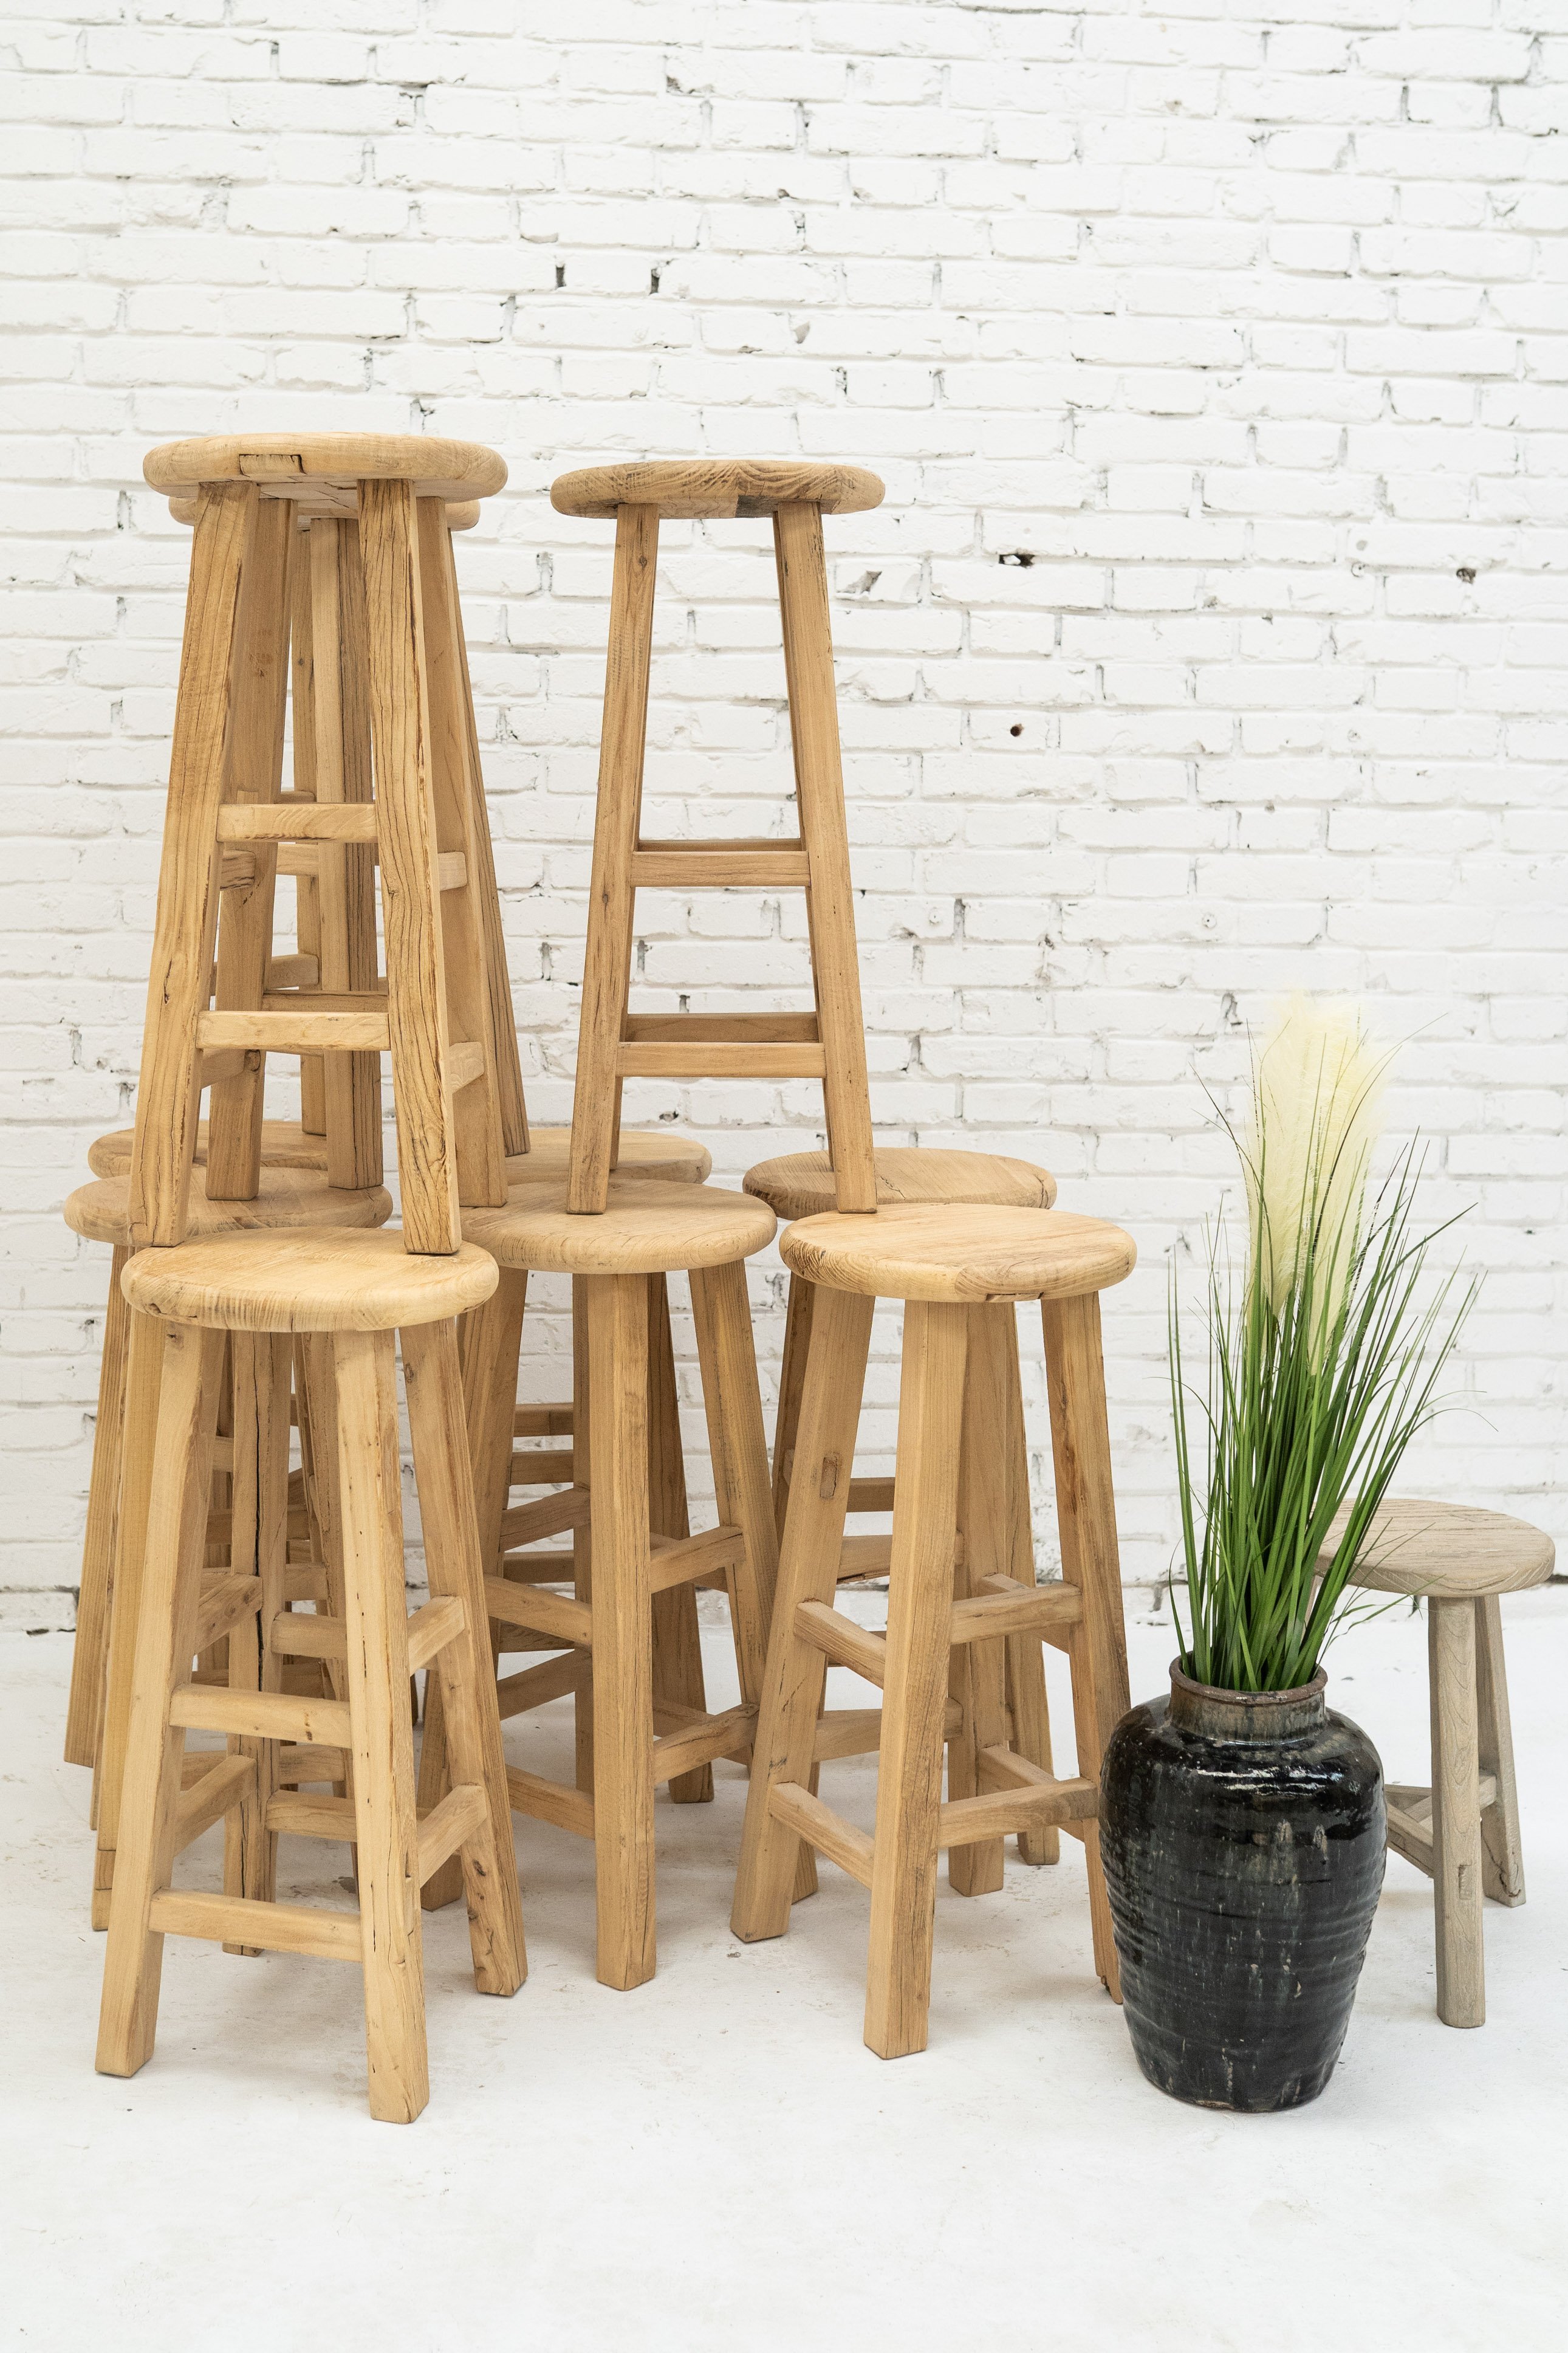 2 x Tall Elm Stool: Stunning wooden bar stools from the Heibei province of China.